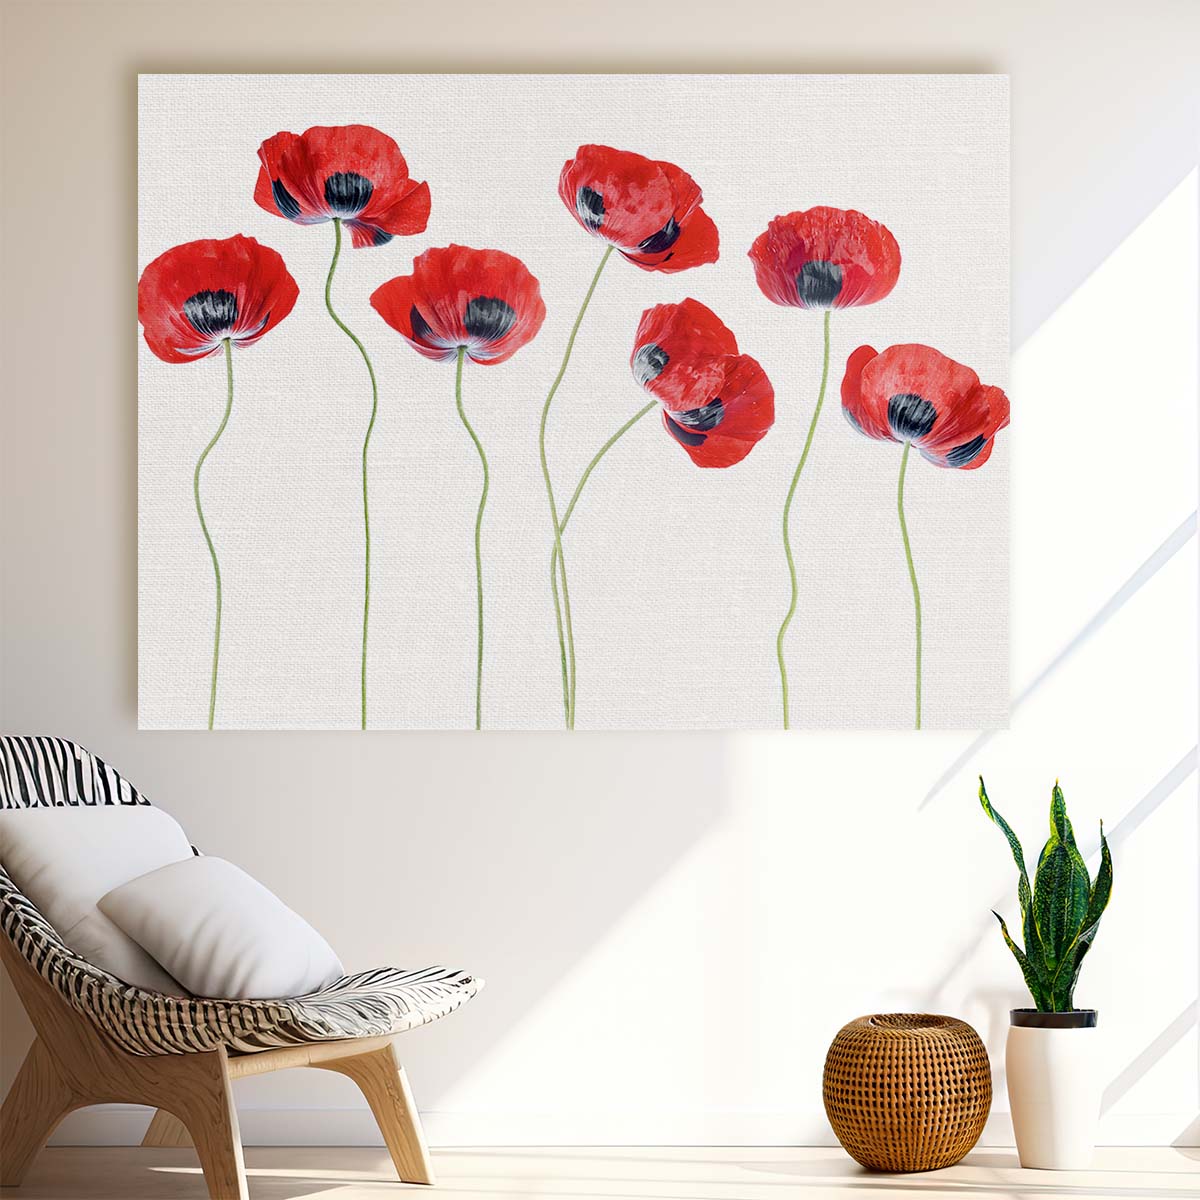 Minimalist Red Poppy Floral Botanical Wall Art by Luxuriance Designs. Made in USA.